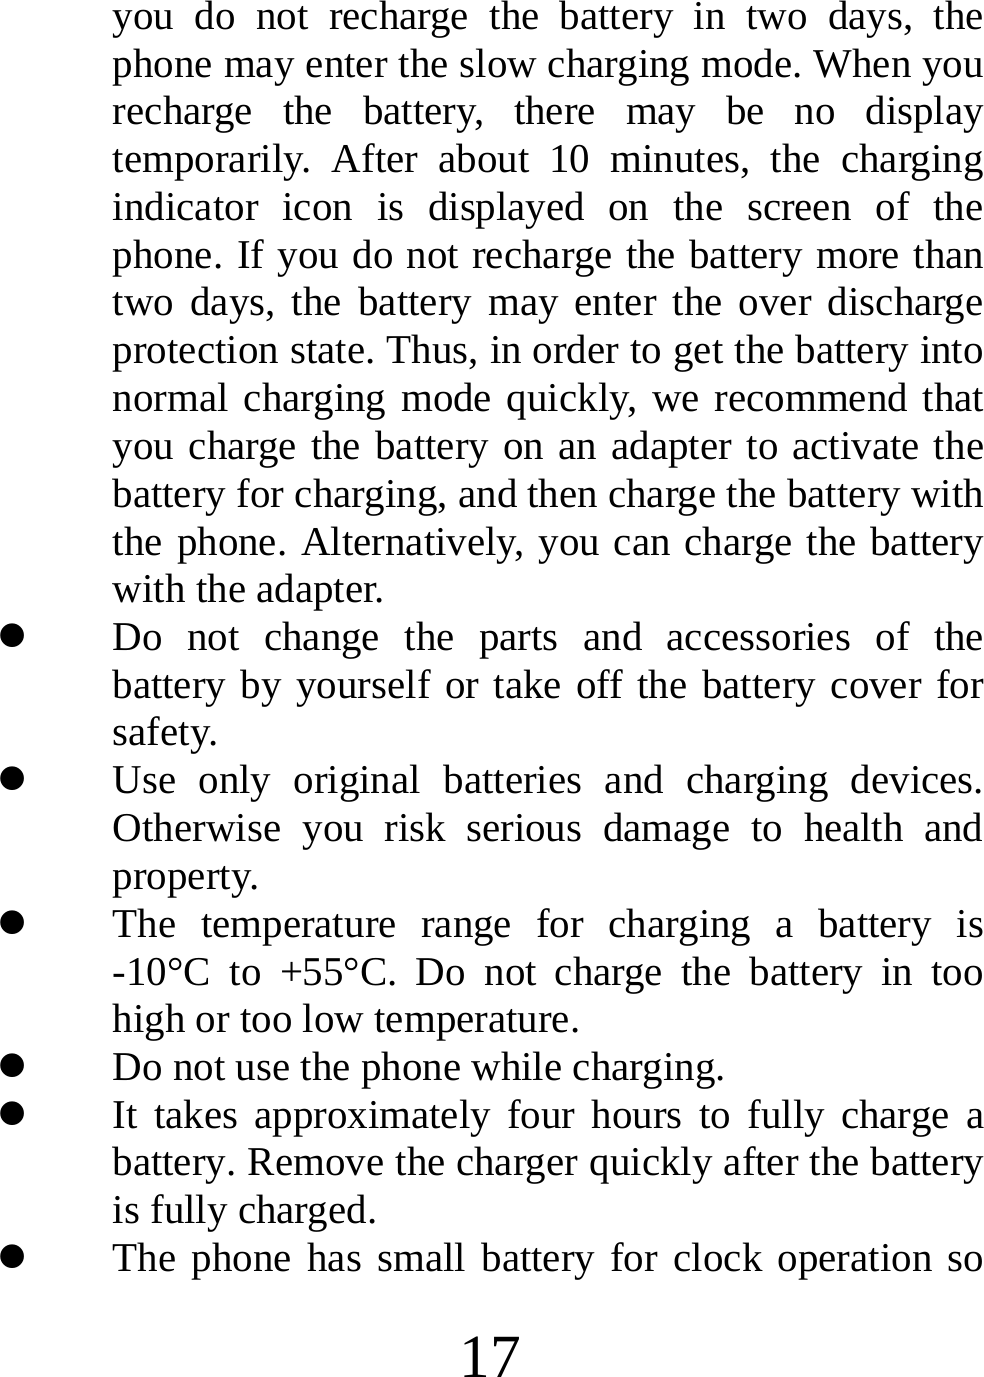  17 you do not recharge the battery in two days, the phone may enter the slow charging mode. When you recharge the battery, there may be no display temporarily. After about 10 minutes, the charging indicator icon is displayed on the screen of the phone. If you do not recharge the battery more than two days, the battery may enter the over discharge protection state. Thus, in order to get the battery into normal charging mode quickly, we recommend that you charge the battery on an adapter to activate the battery for charging, and then charge the battery with the phone. Alternatively, you can charge the battery with the adapter. z Do not change the parts and accessories of the battery by yourself or take off the battery cover for safety. z Use only original batteries and charging devices. Otherwise you risk serious damage to health and property. z The temperature range for charging a battery is -10°C to +55°C. Do not charge the battery in too high or too low temperature. z Do not use the phone while charging. z It takes approximately four hours to fully charge a battery. Remove the charger quickly after the battery is fully charged. z The phone has small battery for clock operation so 